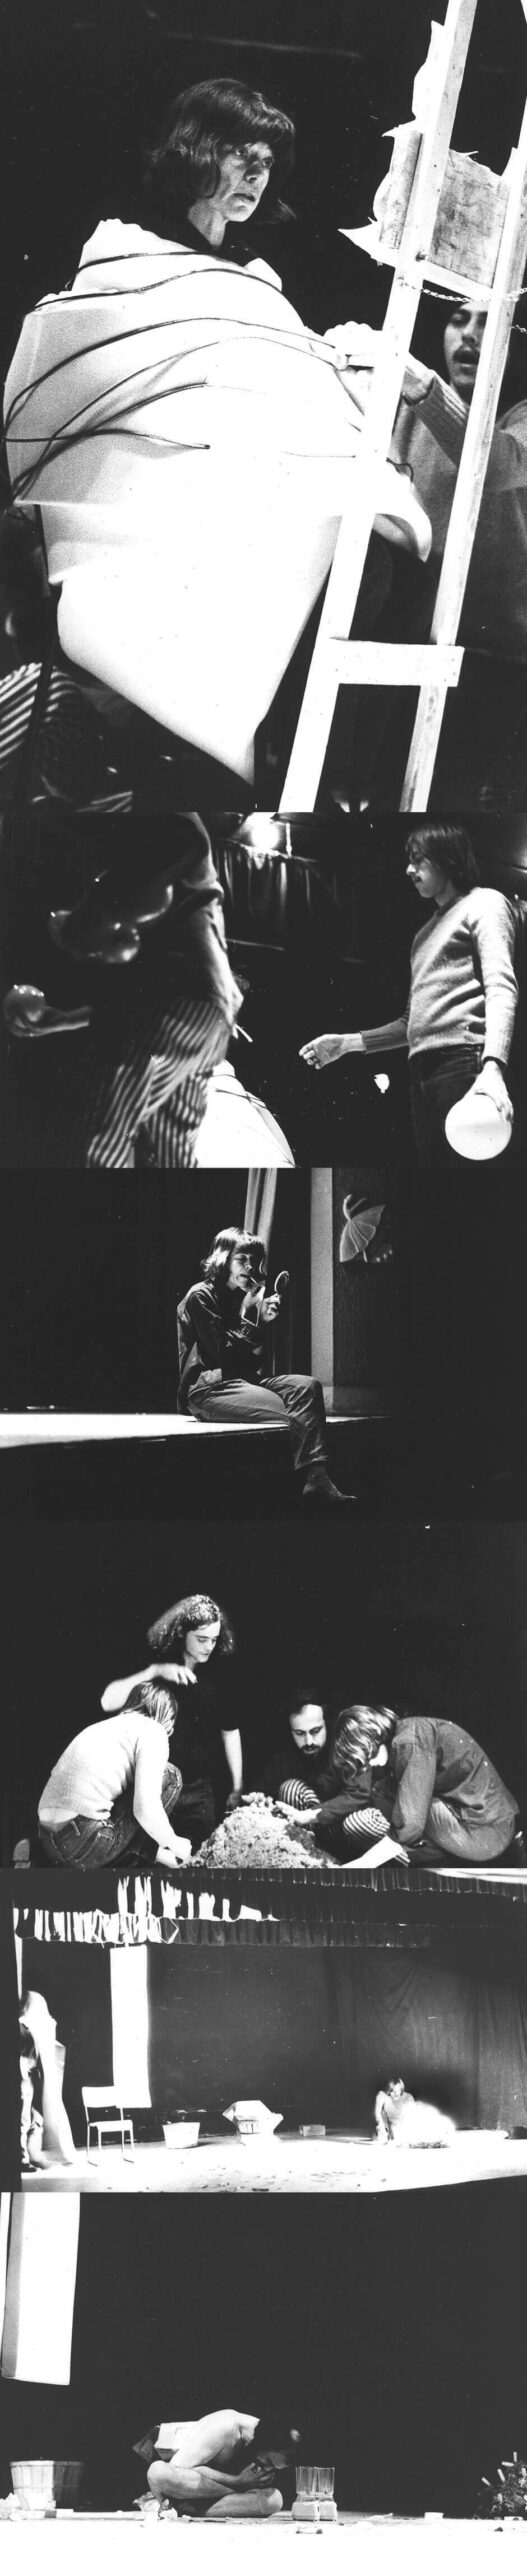 Art Canada Institute, Match My Strike, directed by Jorge Zontal and produced by John Neon, Poor Alex Theatre, Toronto, August 30, 1969